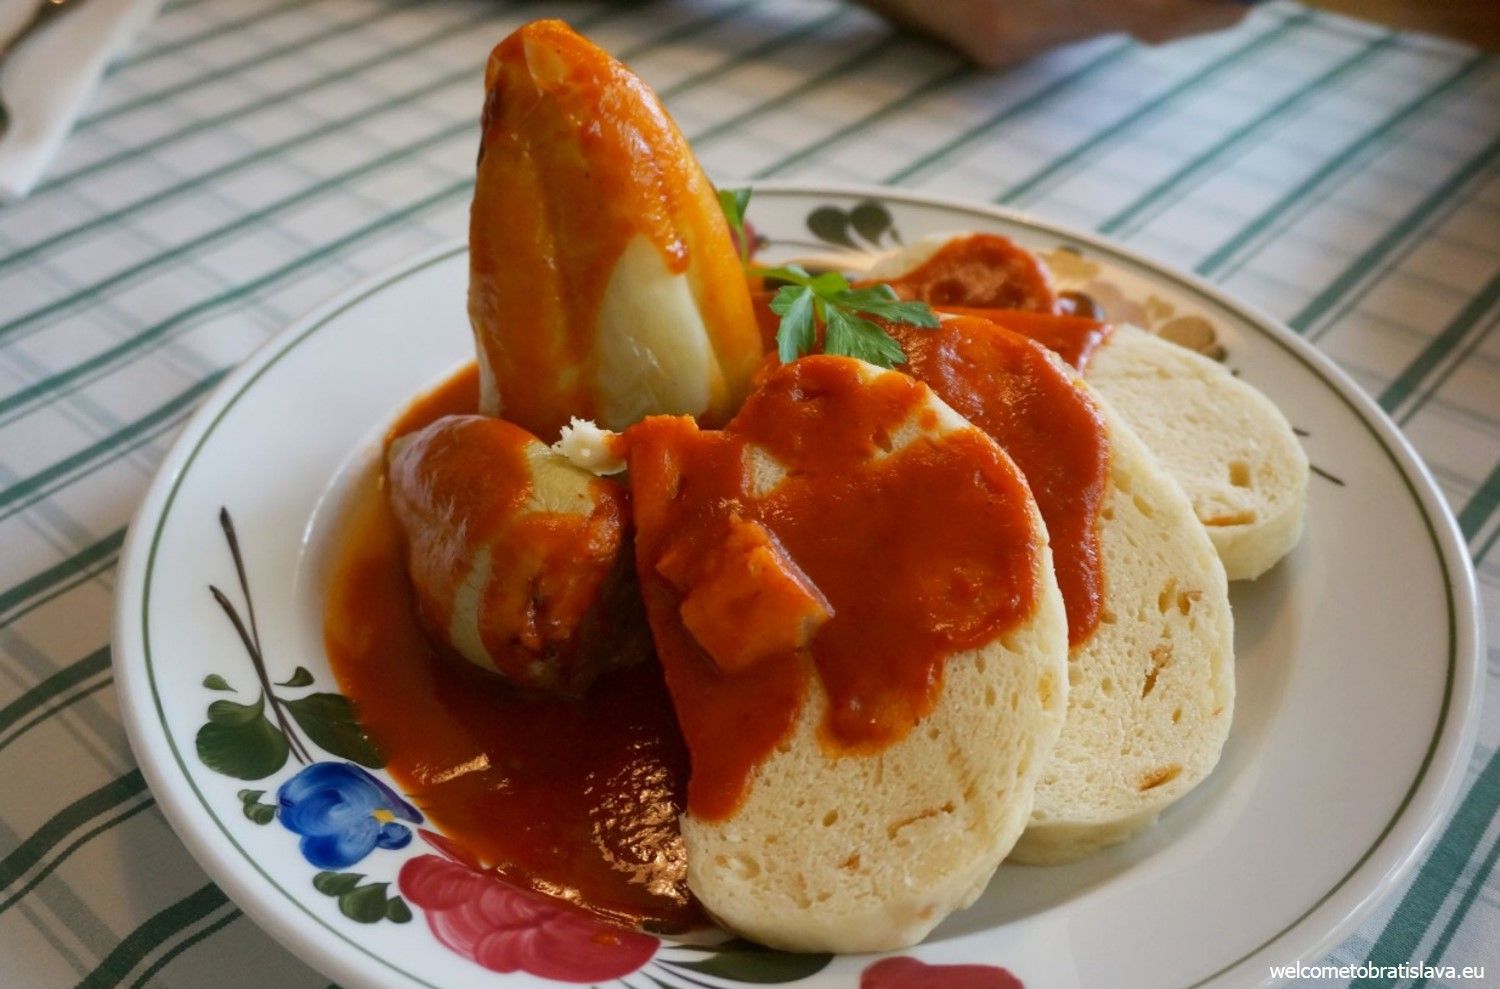 The stuffed pepper with meat, served with dumplings, is a typical Hungarian dish.